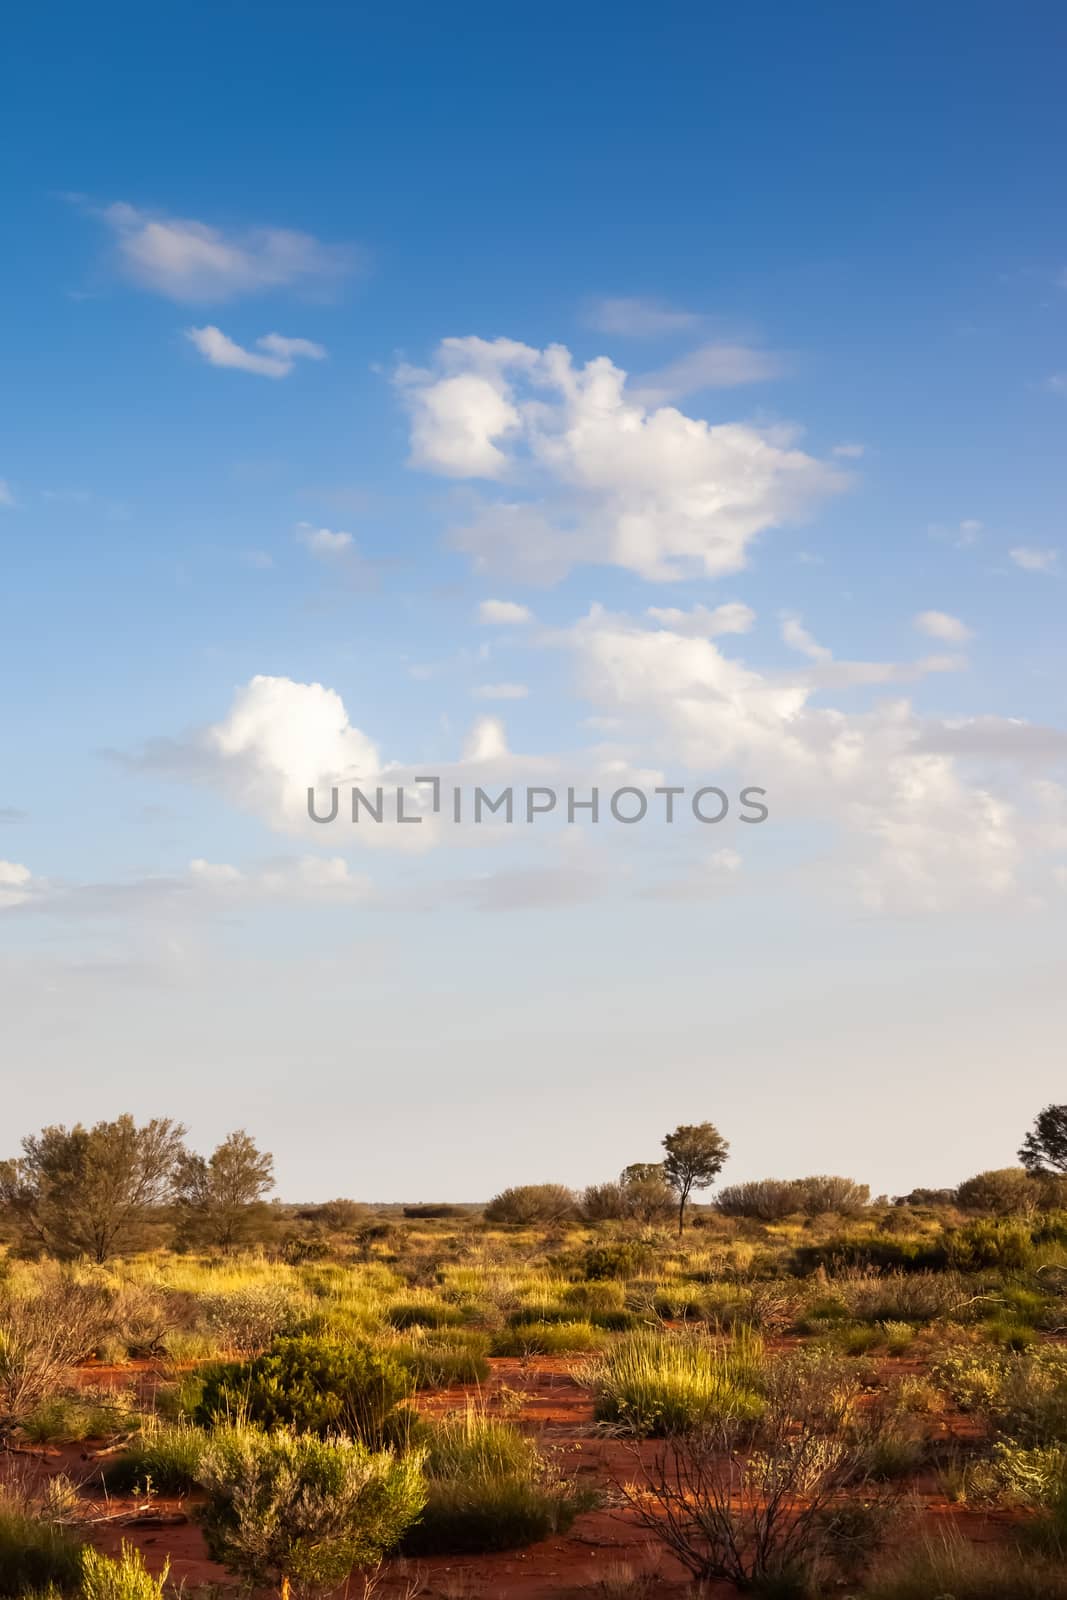 An image of a landscape scenery of the Australia outback